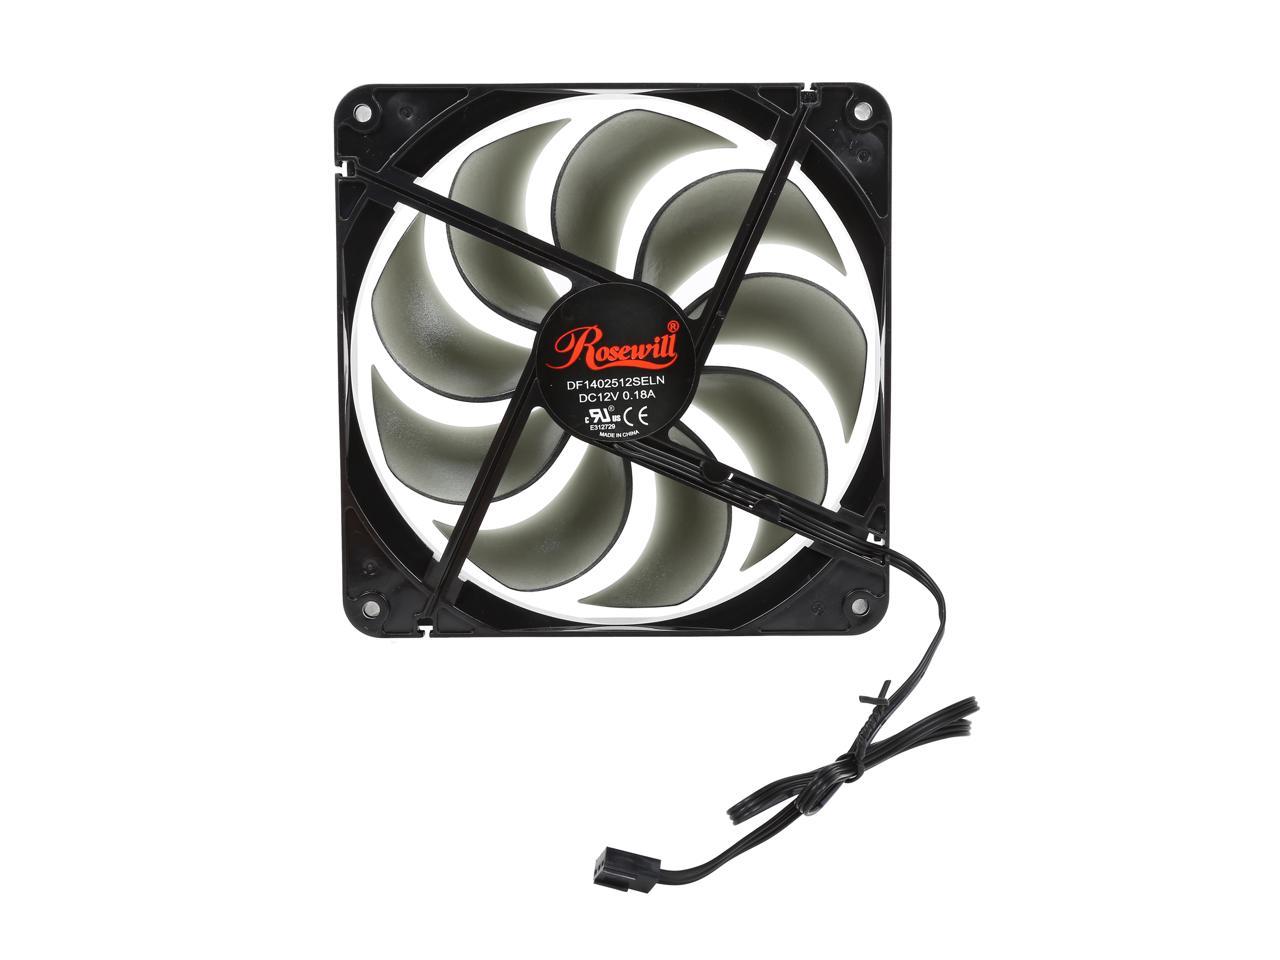 Rosewill RABF-131409 - 140mm Computer Case Cooling Fan with LP4 Adapter - Black Frame & Smoke Blades, Sleeve Bearing, Silent